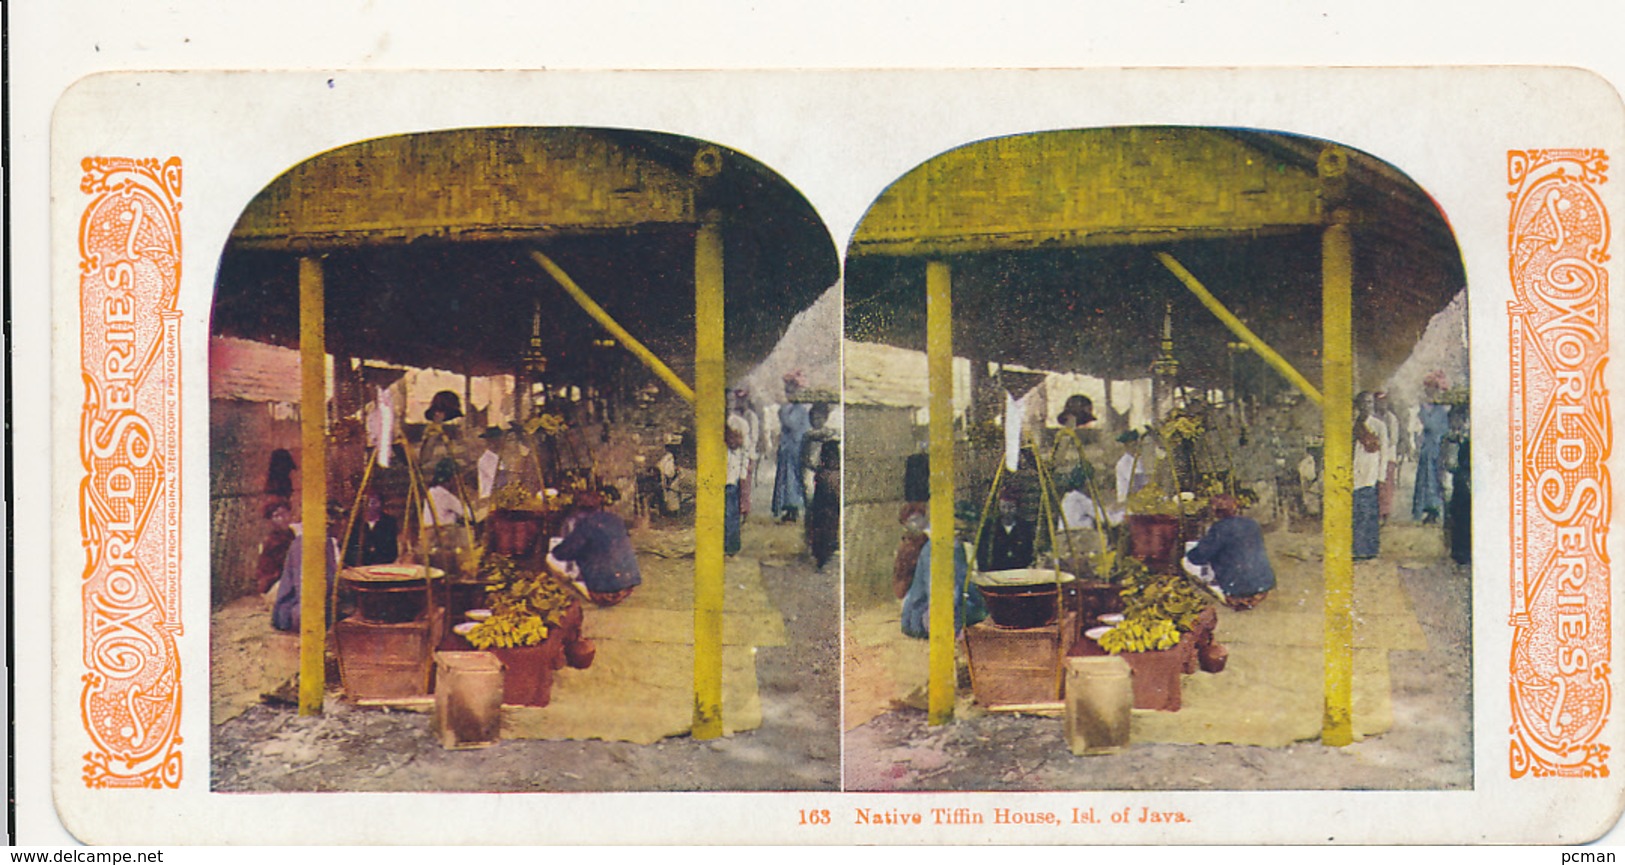 STEREOVIEW - # 163, Native Tiffin House, Isl. Of Java (Indonesia), WORLD SERIES, By KAWIN, 1905 - Stereoscopio